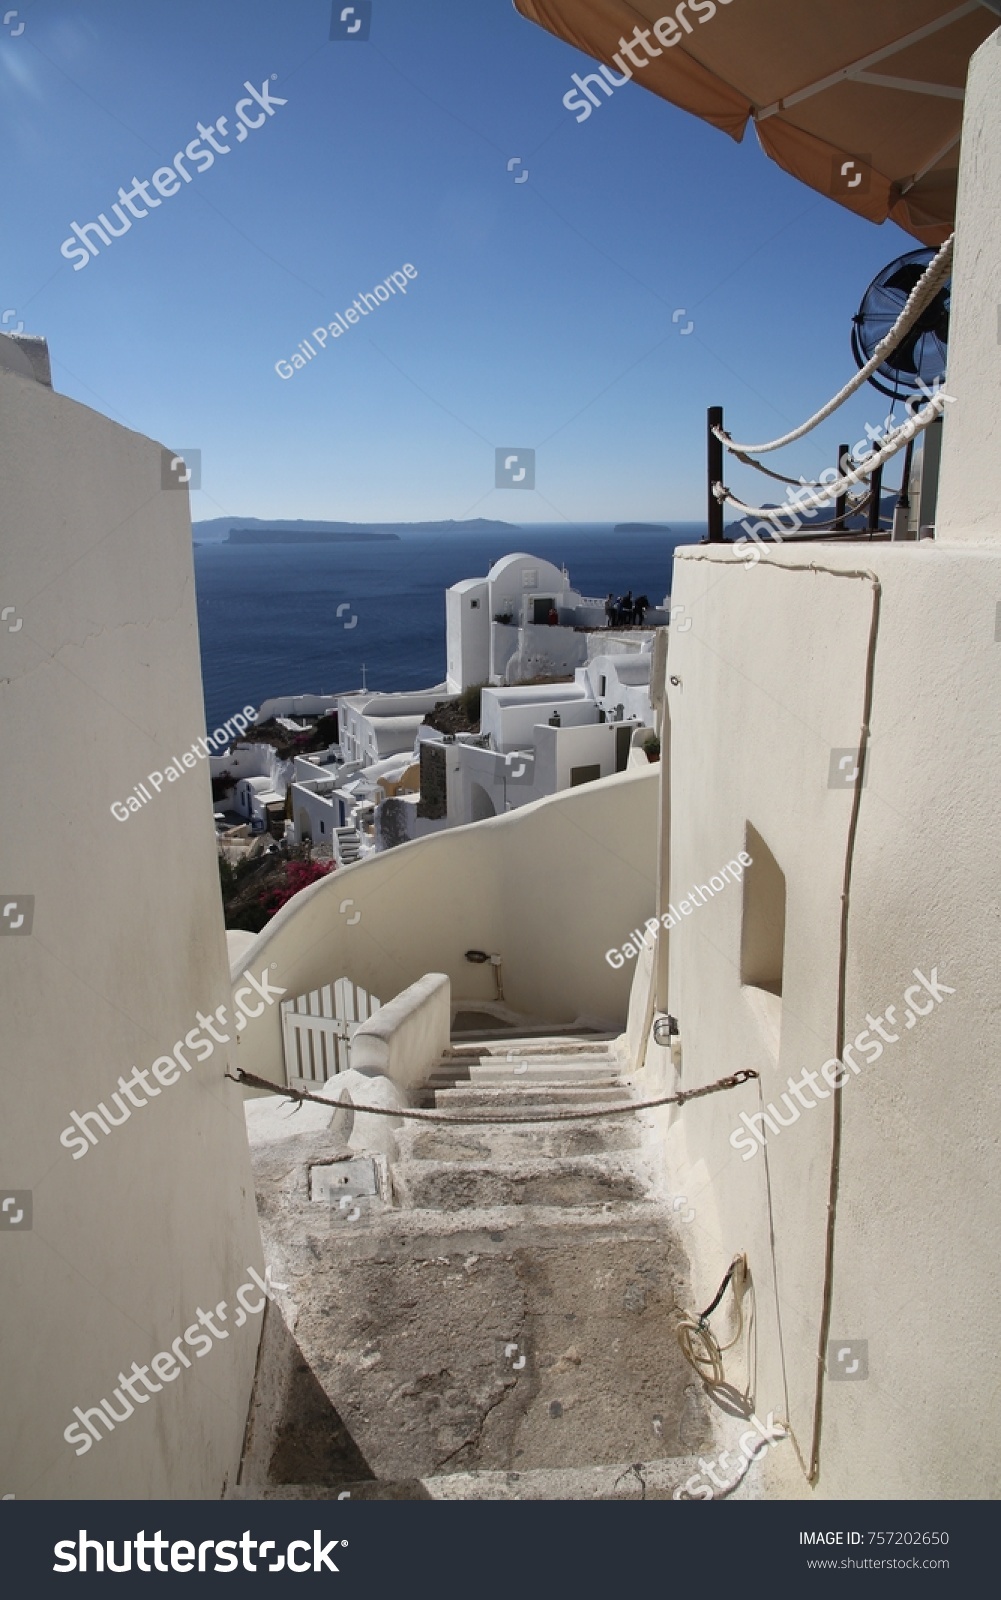 A view of colorful cubiform buildings on Santorini Island in Greece clinging to the cliff over the Aegean Sea.  #757202650